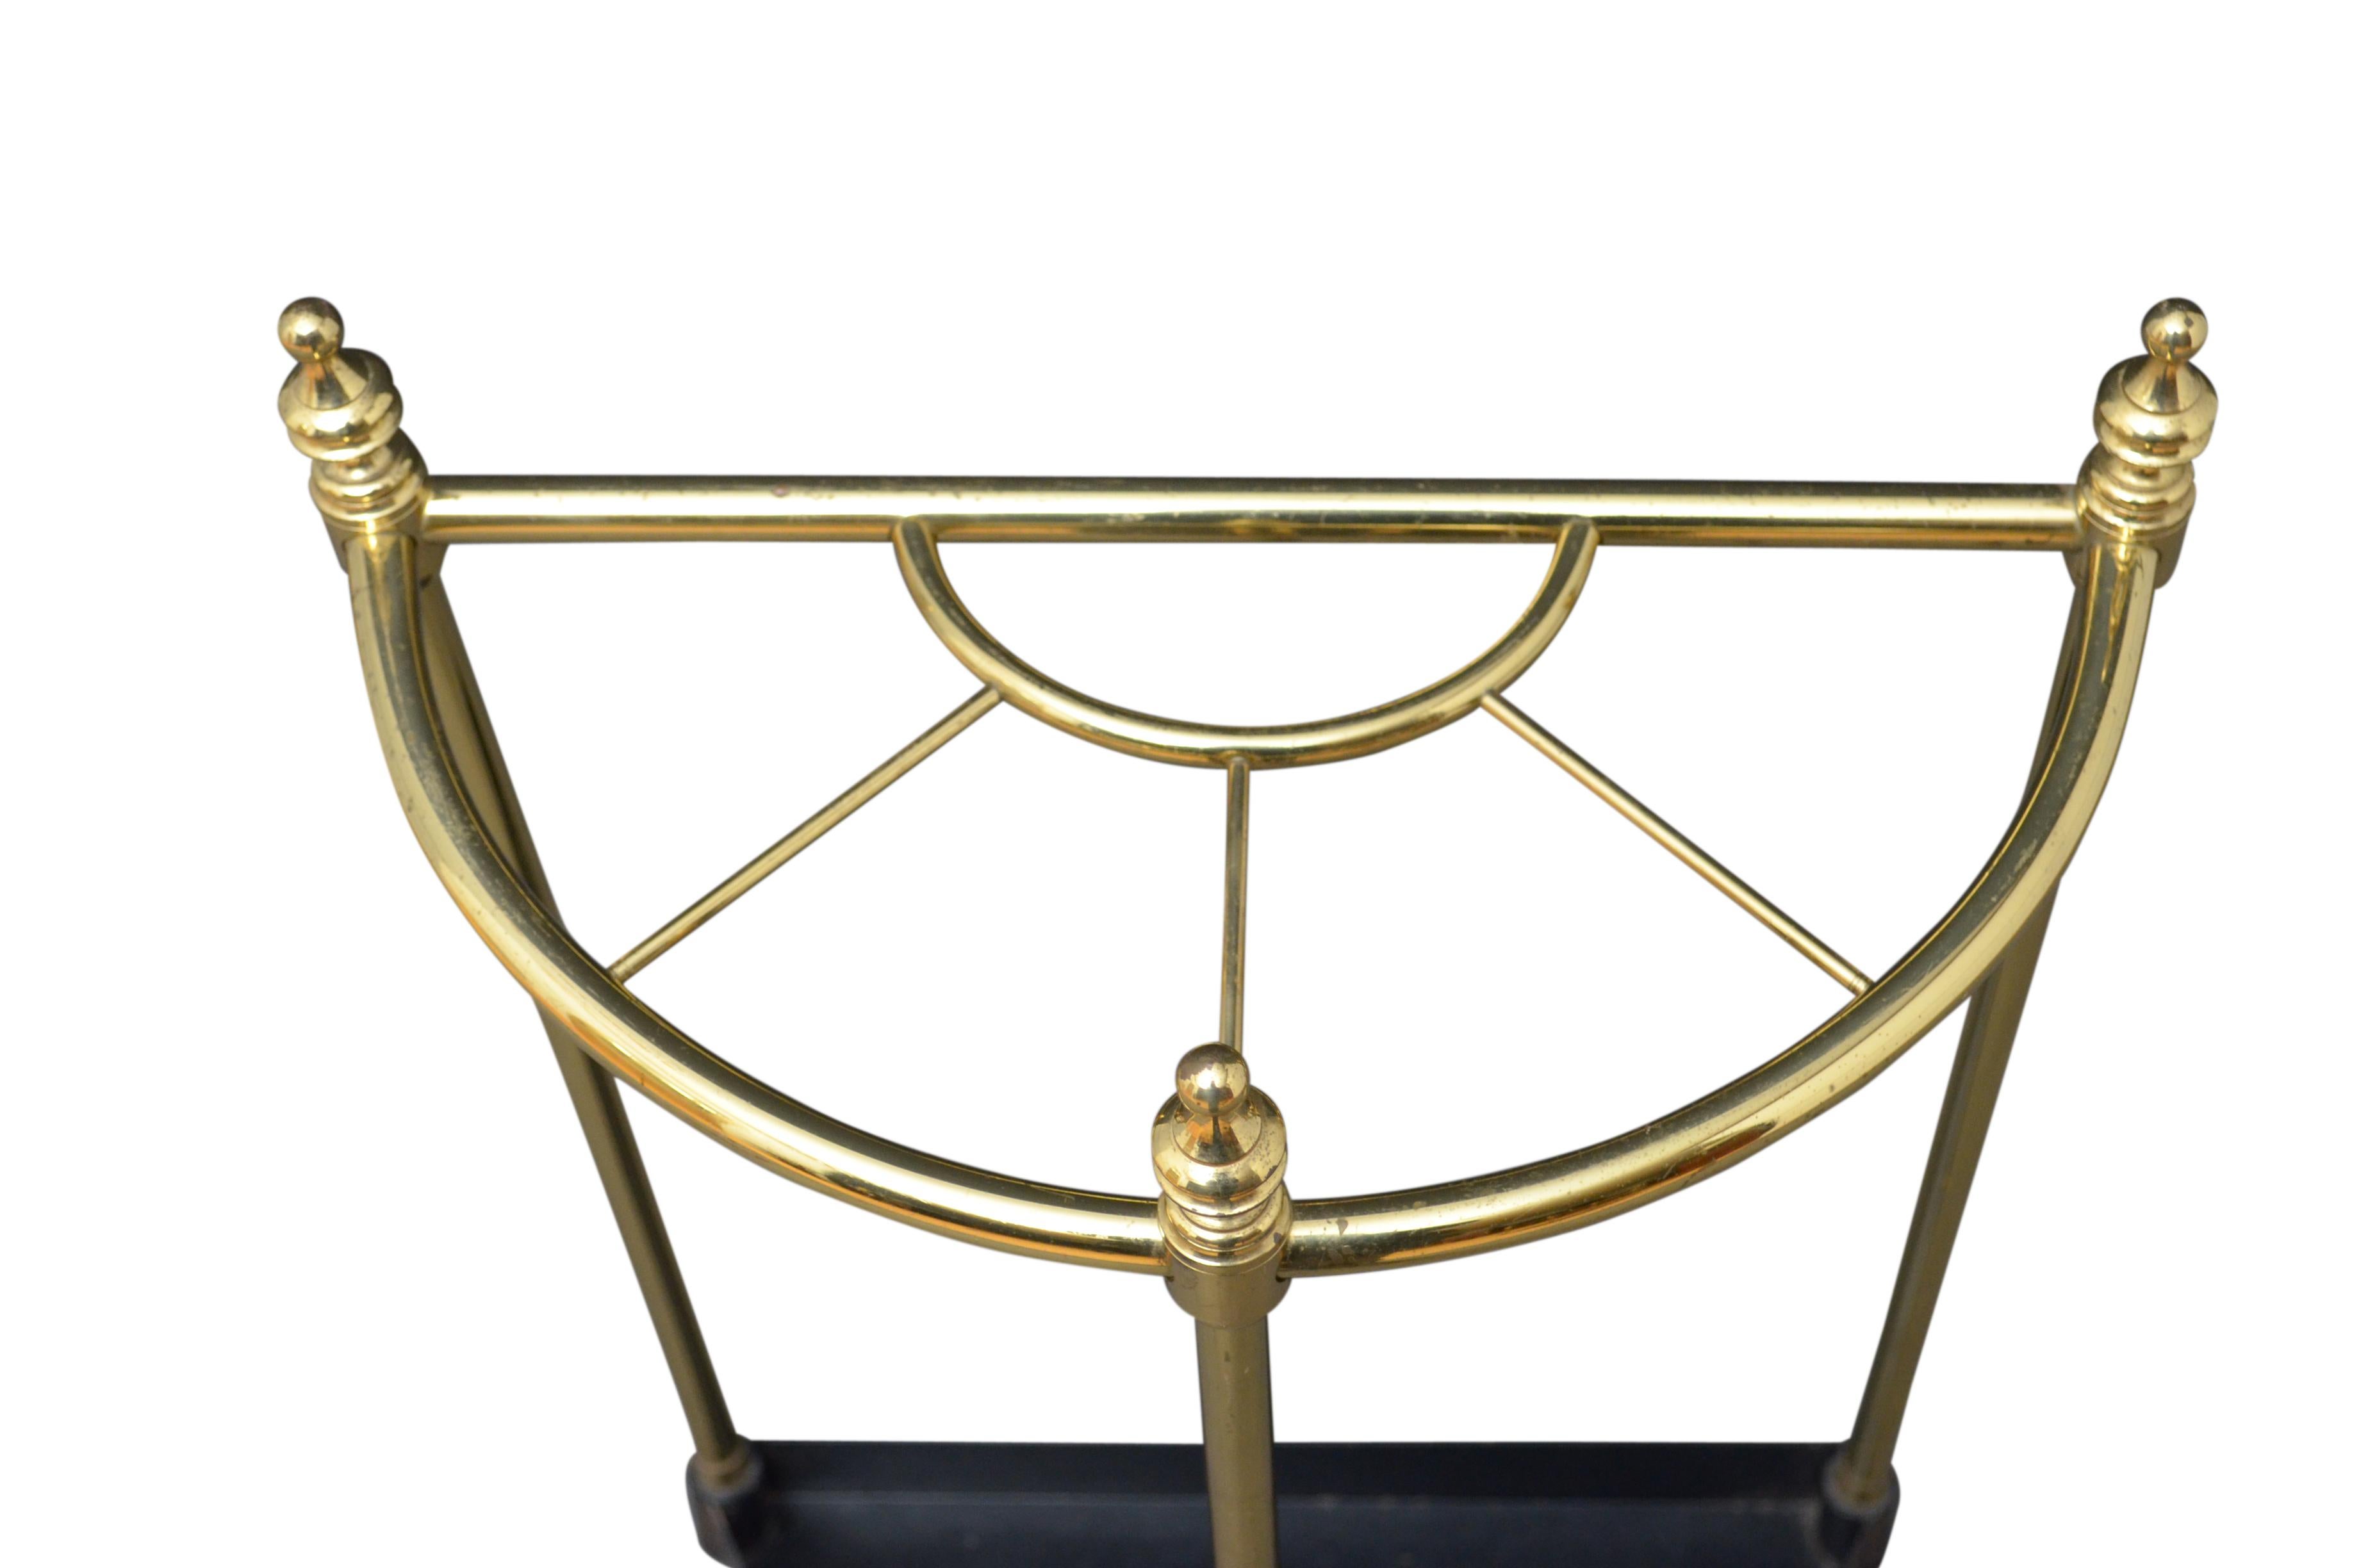 Vintage demilune, brass stick stand with 4 sections, decorative finials and shaped drip tray. This umbrella Stand is in original condition, retaining original lacquer and signs of usage, circa 1940.
Measures: H 25